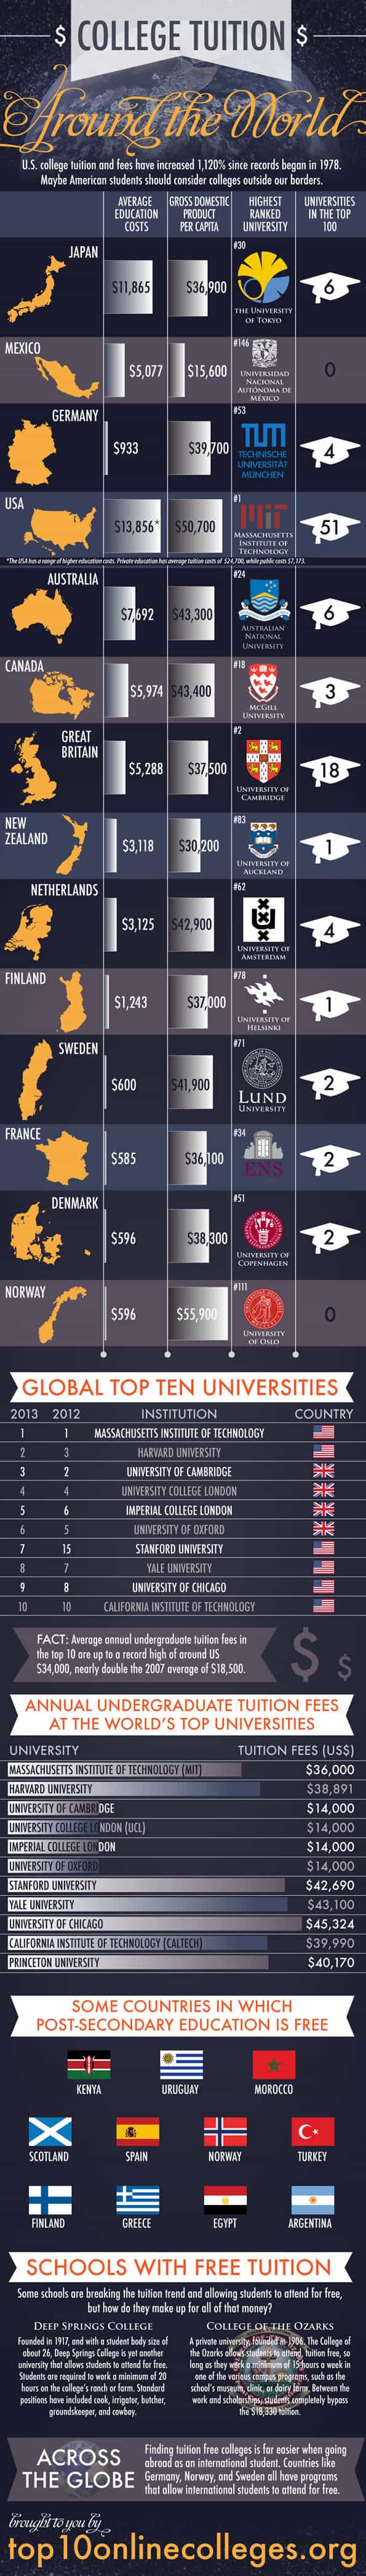 Worldwide College Tuition Costs